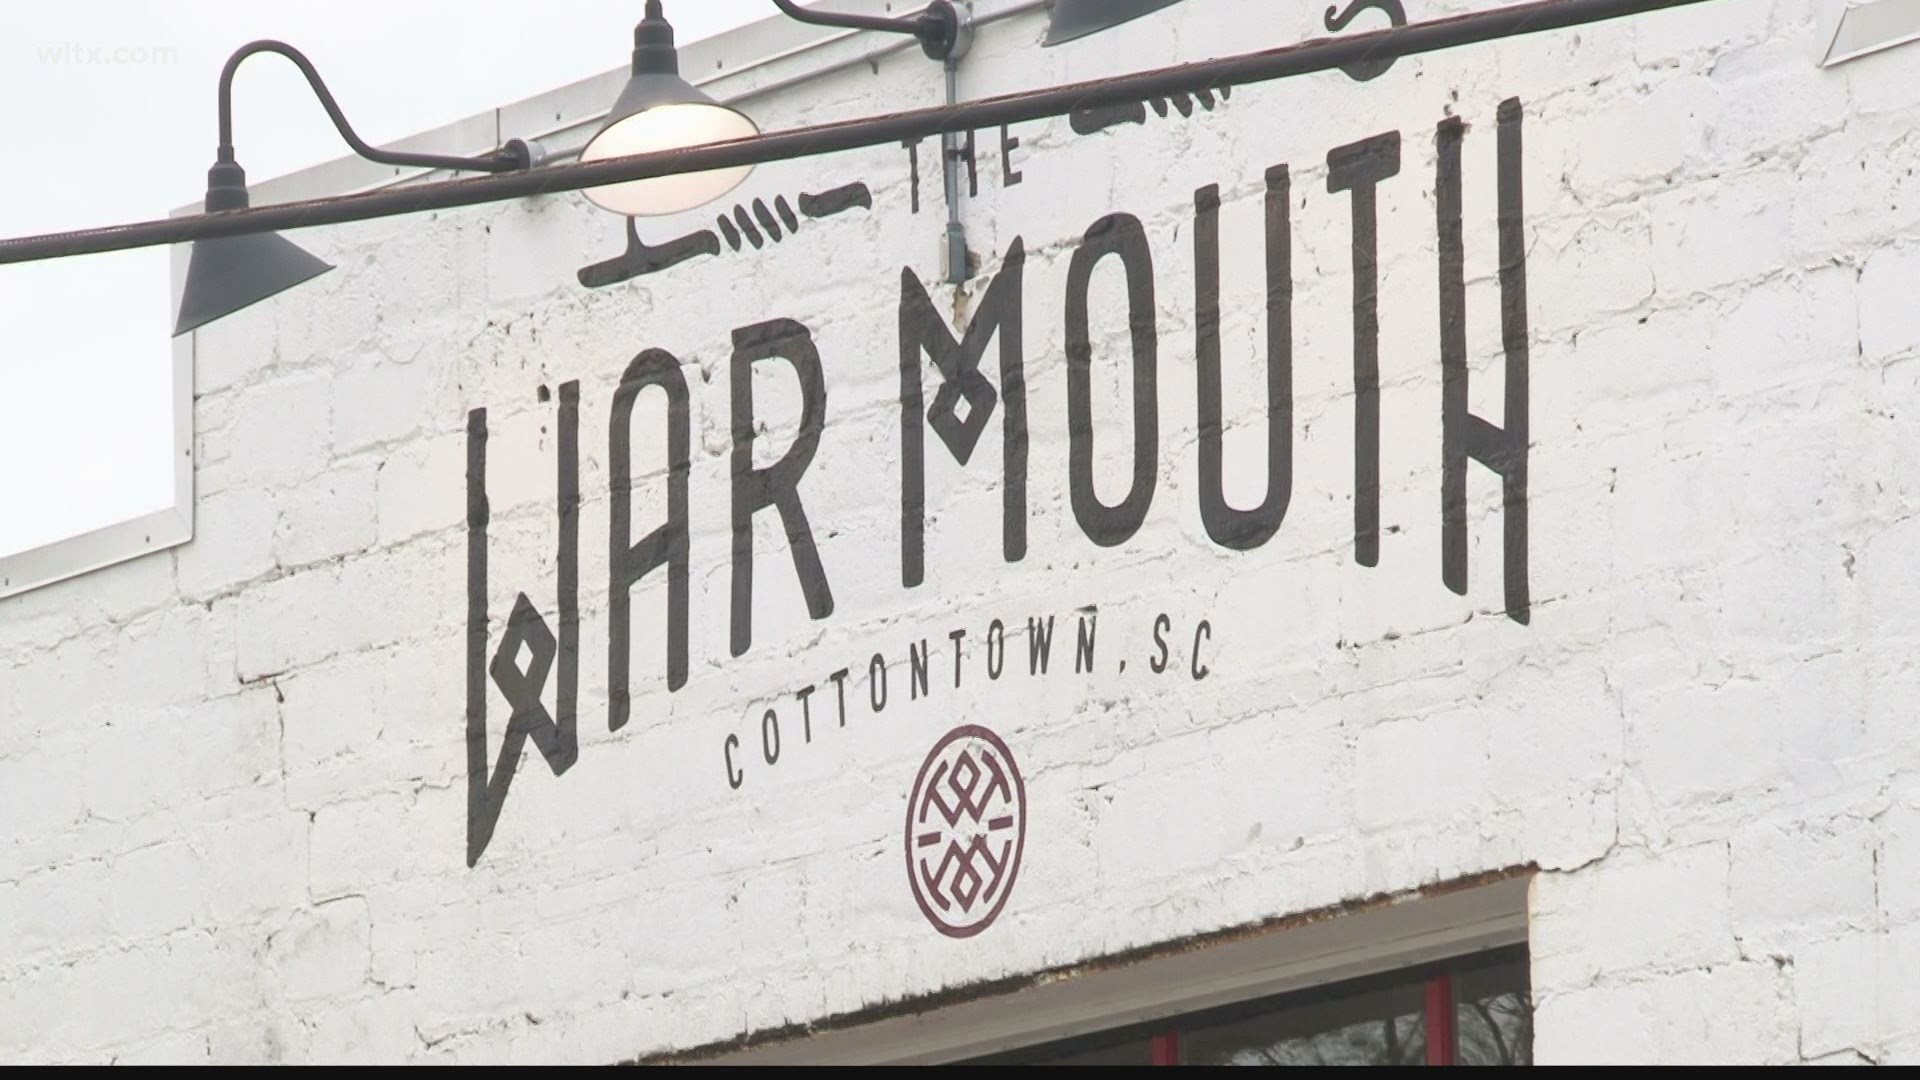 Owners of The War Mouth worked relentlessly to keep the doors open, even delivering food themselves.